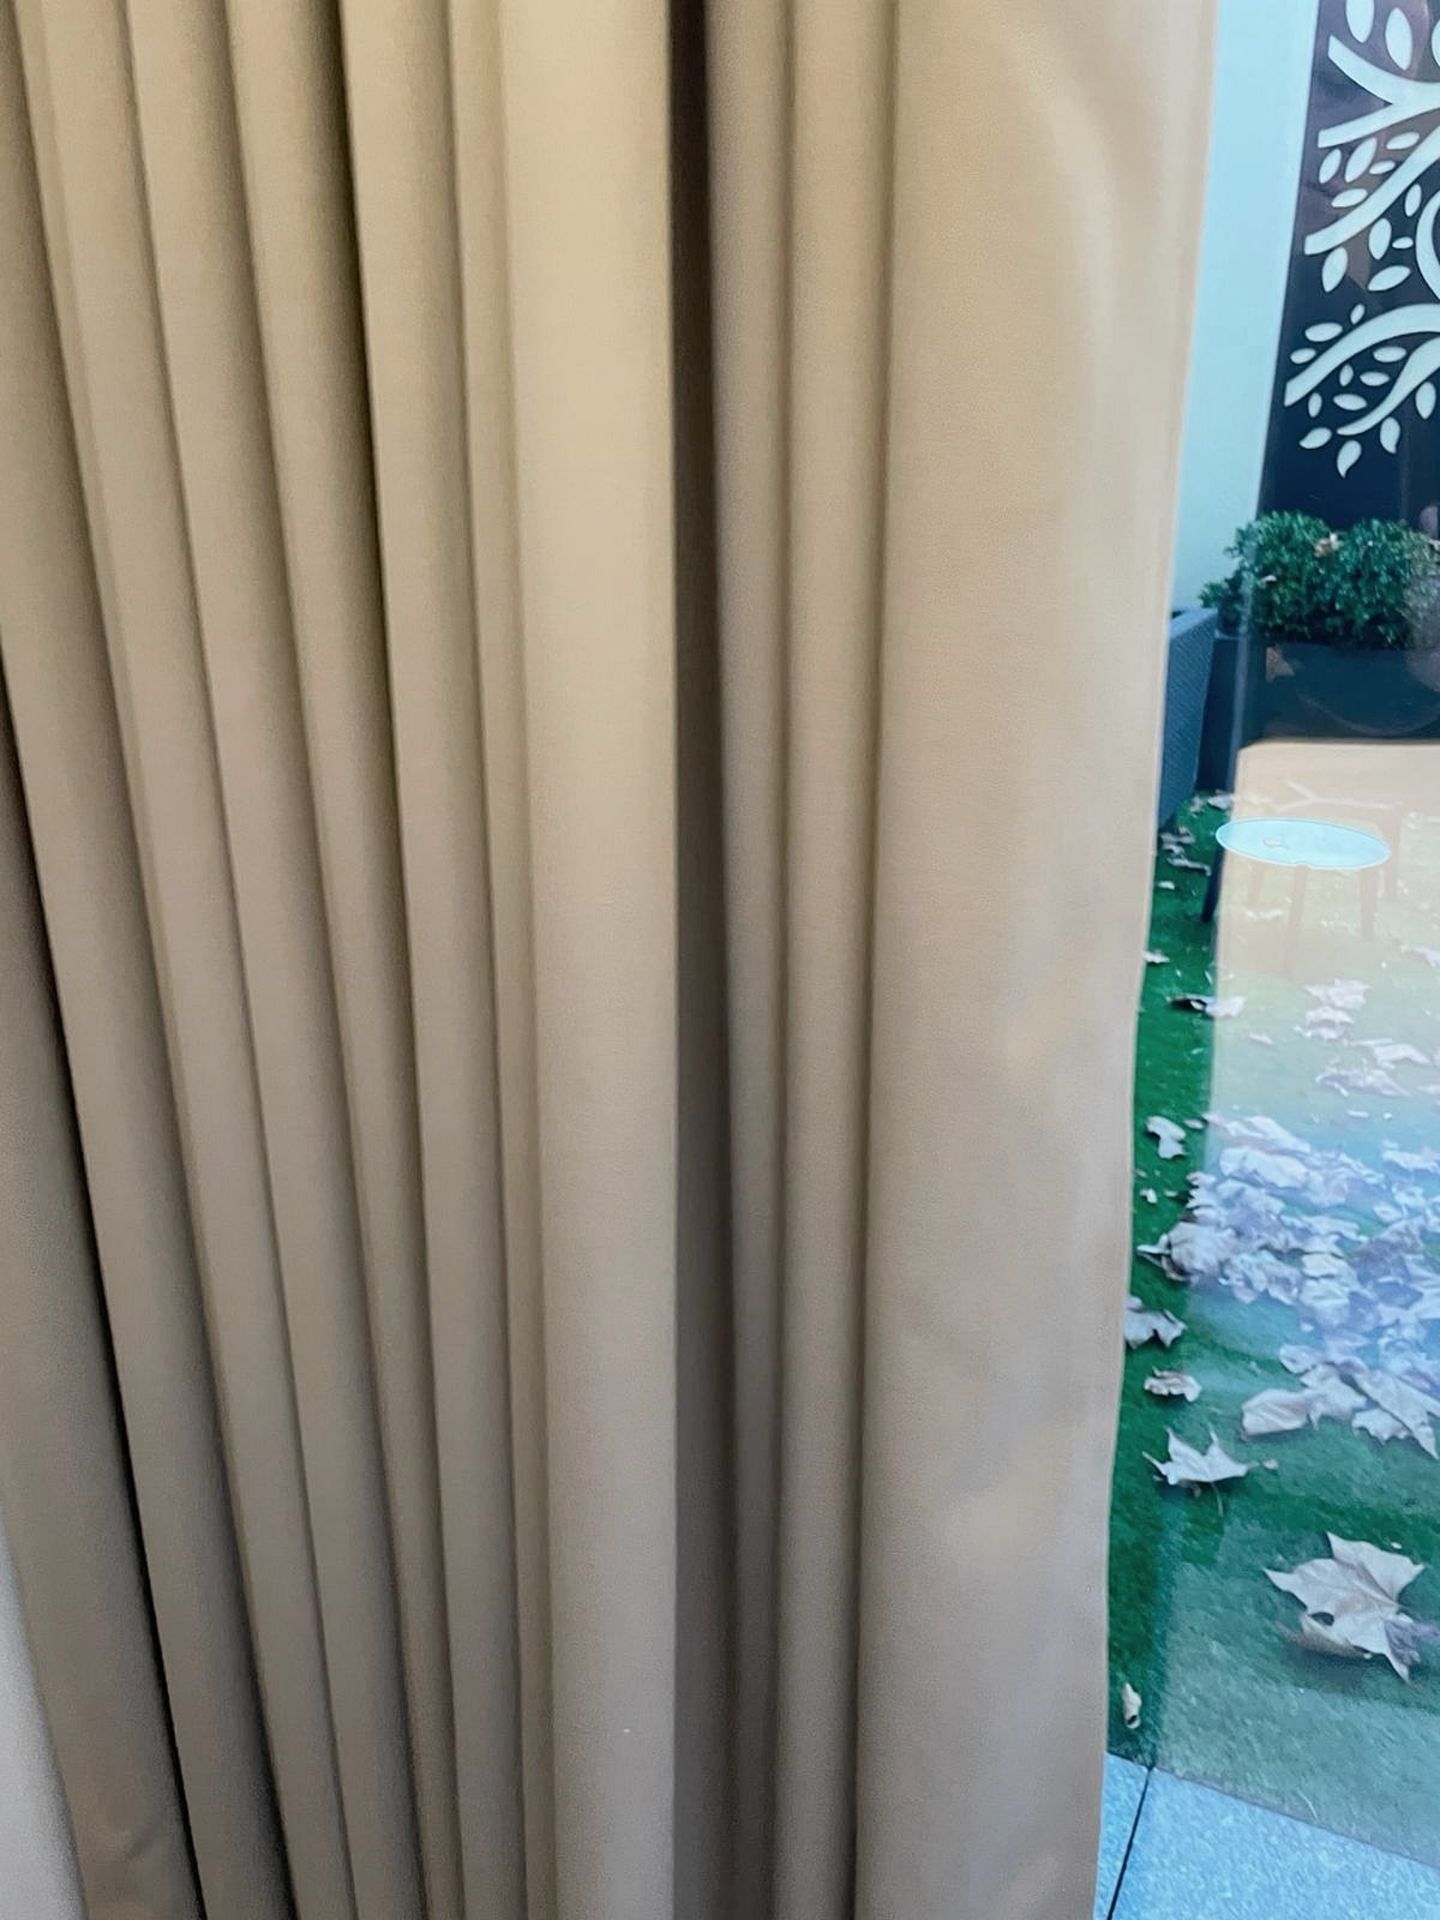 1 x Luxury Lined Bedroom Curtain in a Neutral Tone - Image 2 of 6